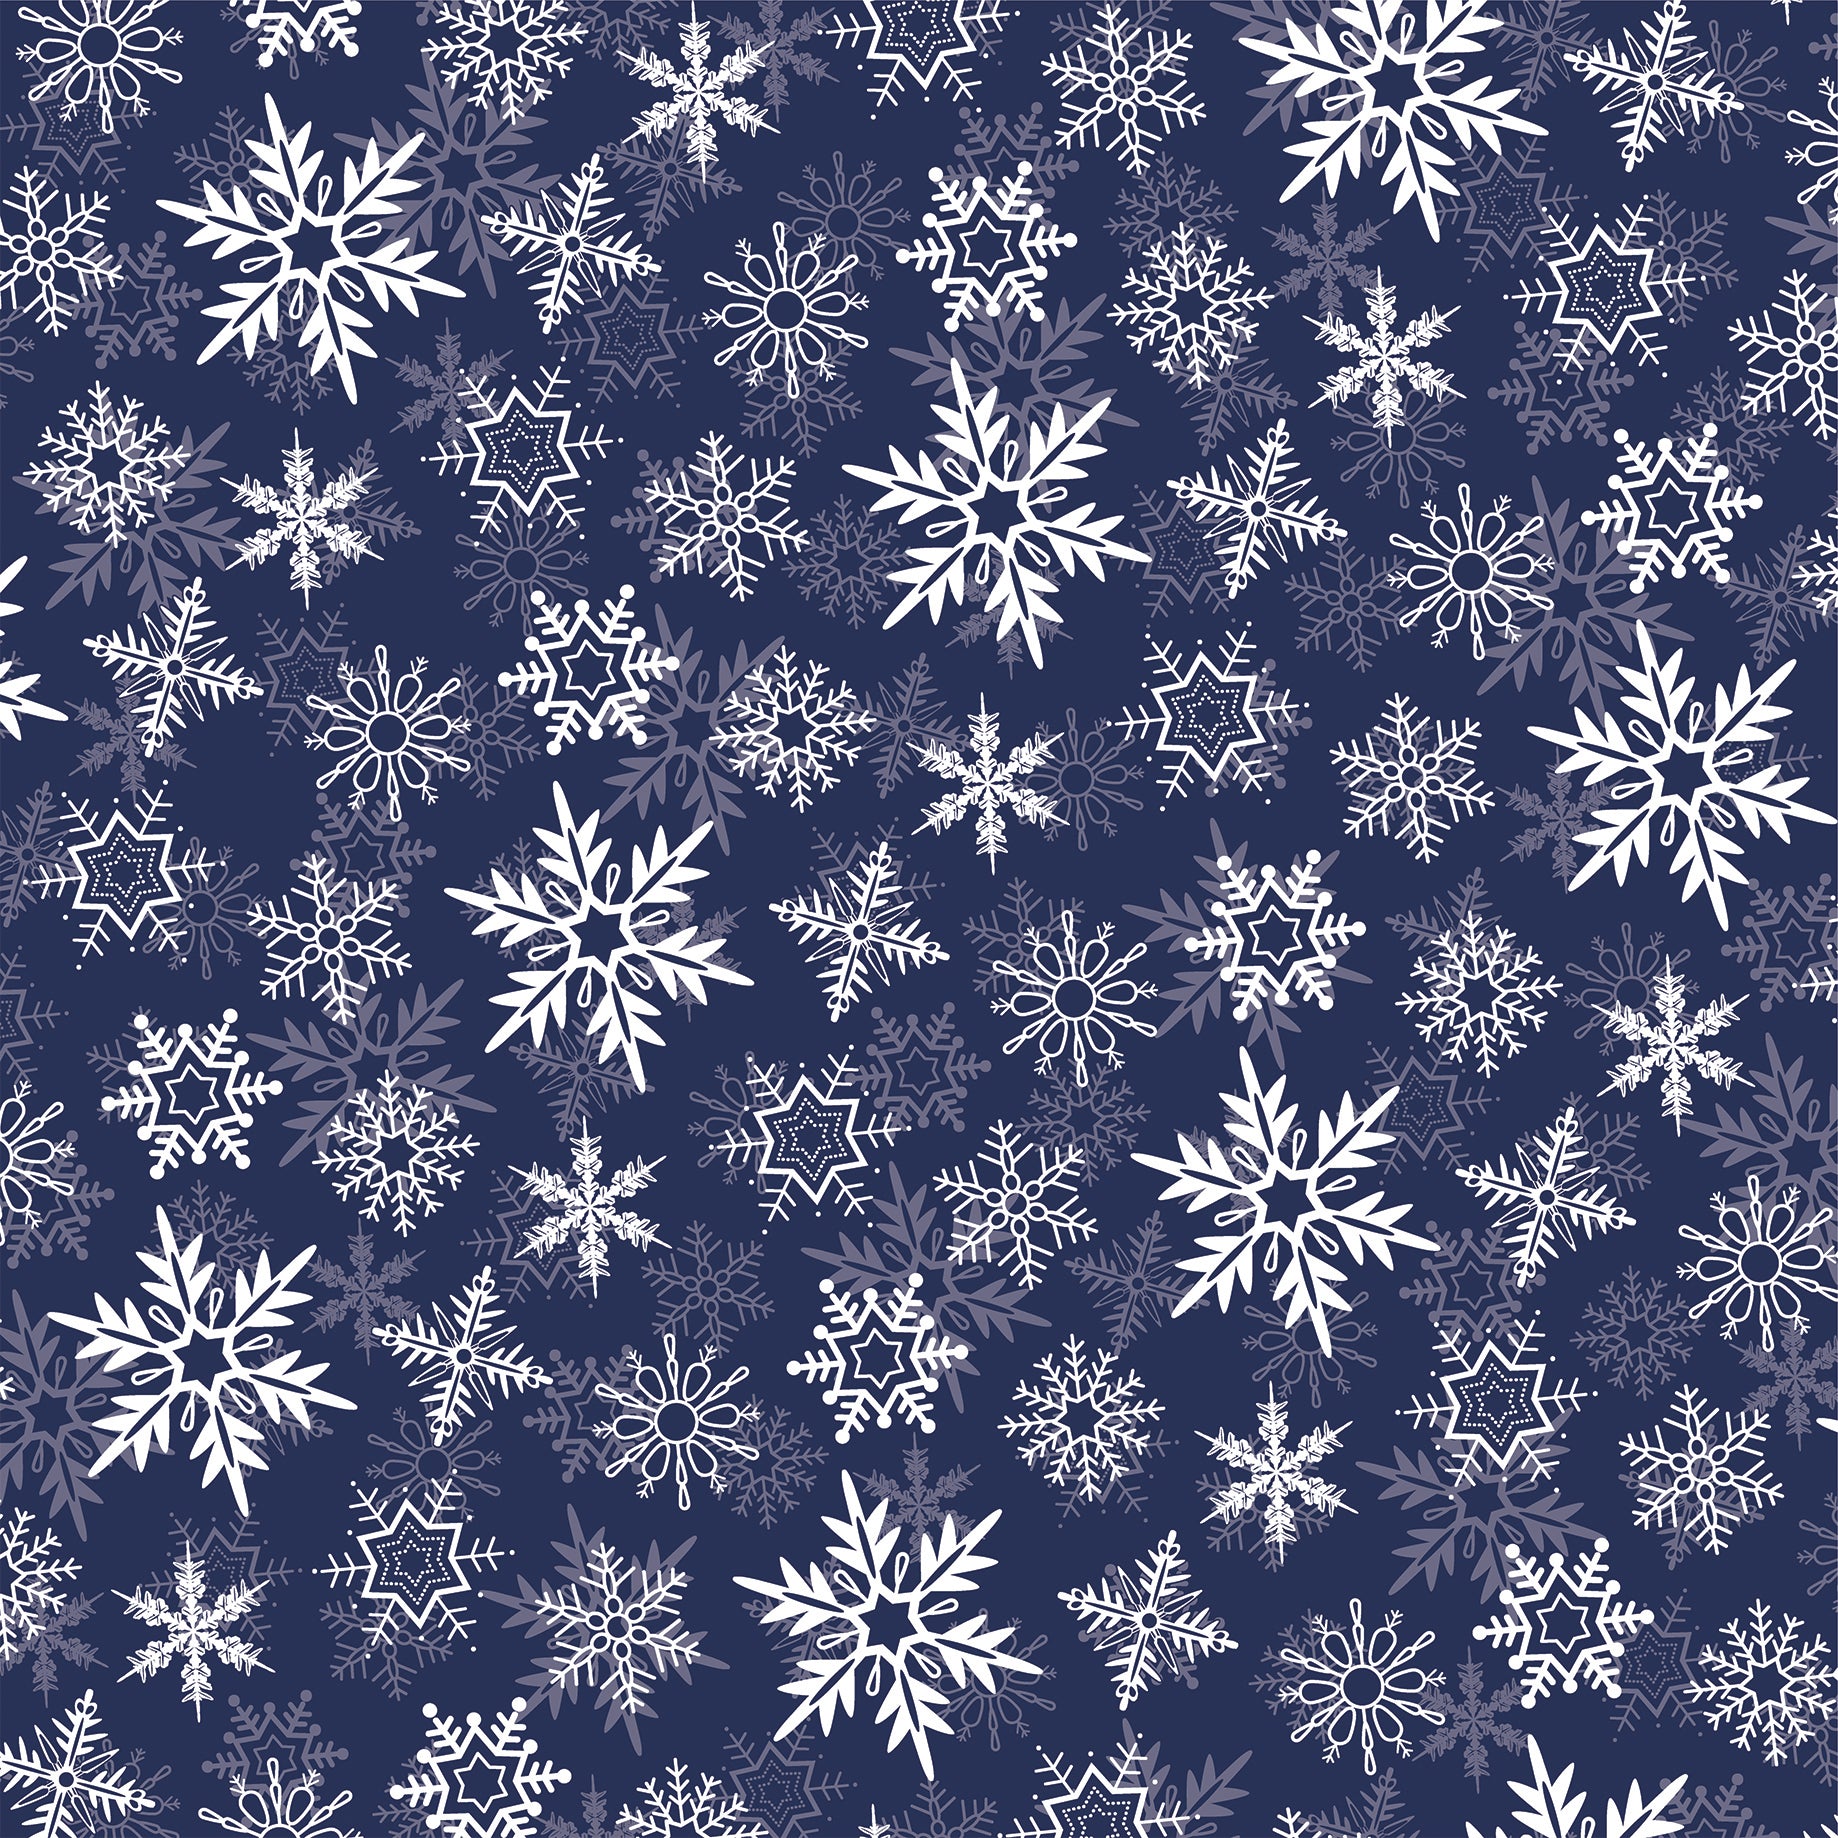 Wintertime Collection Frosted Day 12 x 12 Double-Sided Scrapbook Paper by Carta Bella